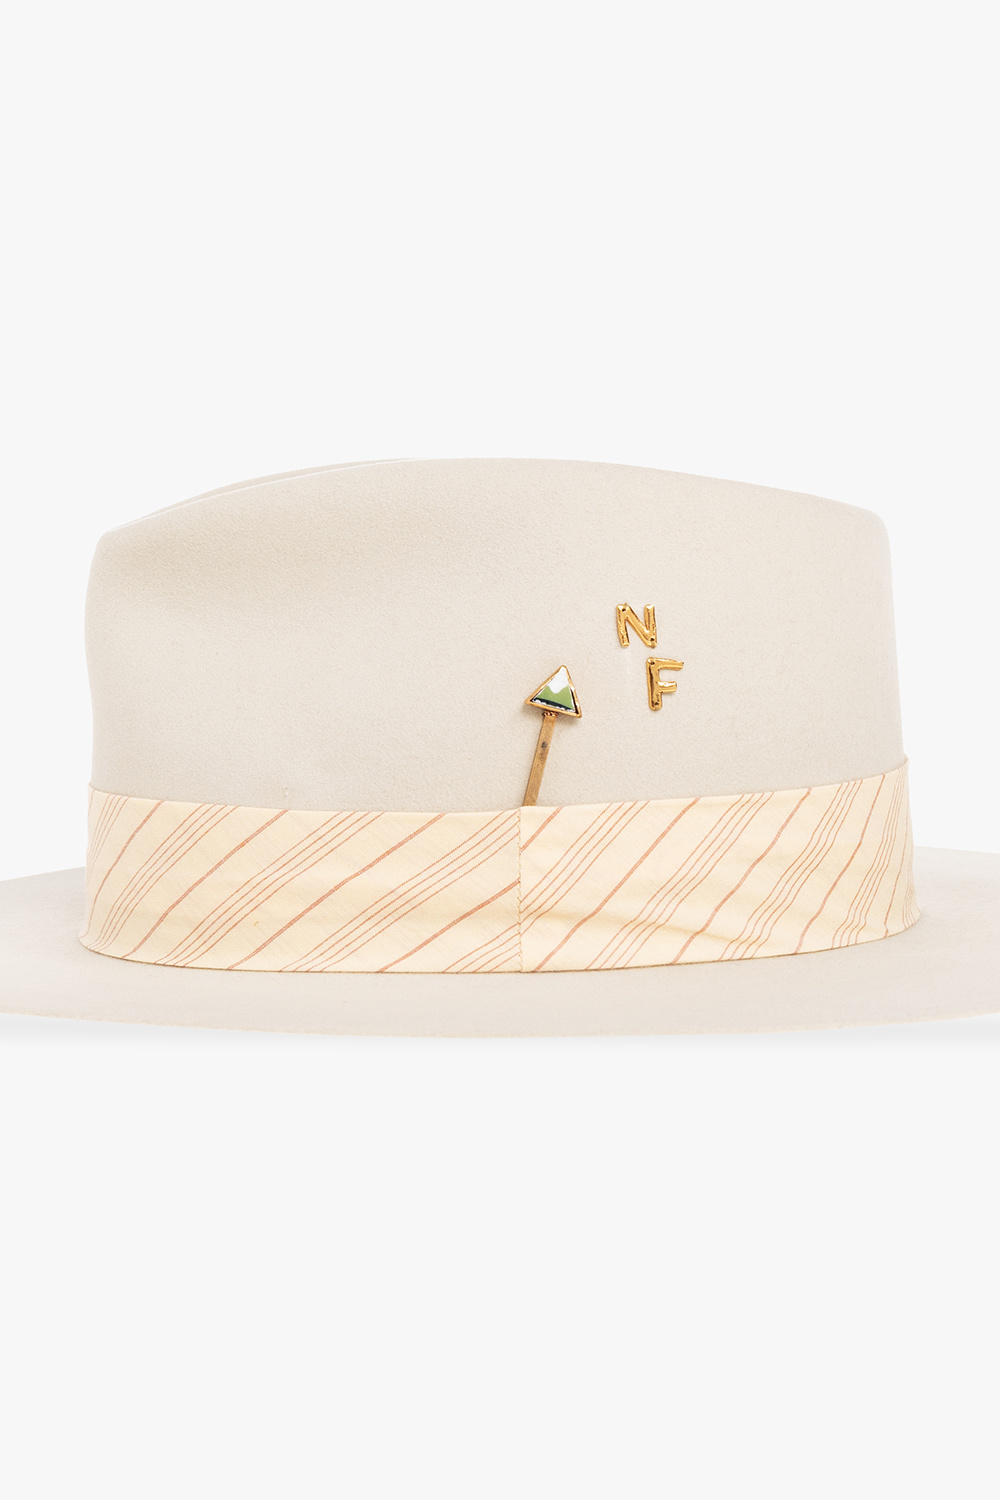 Nick Fouquet ‘NF Rodeo’ fedora hat